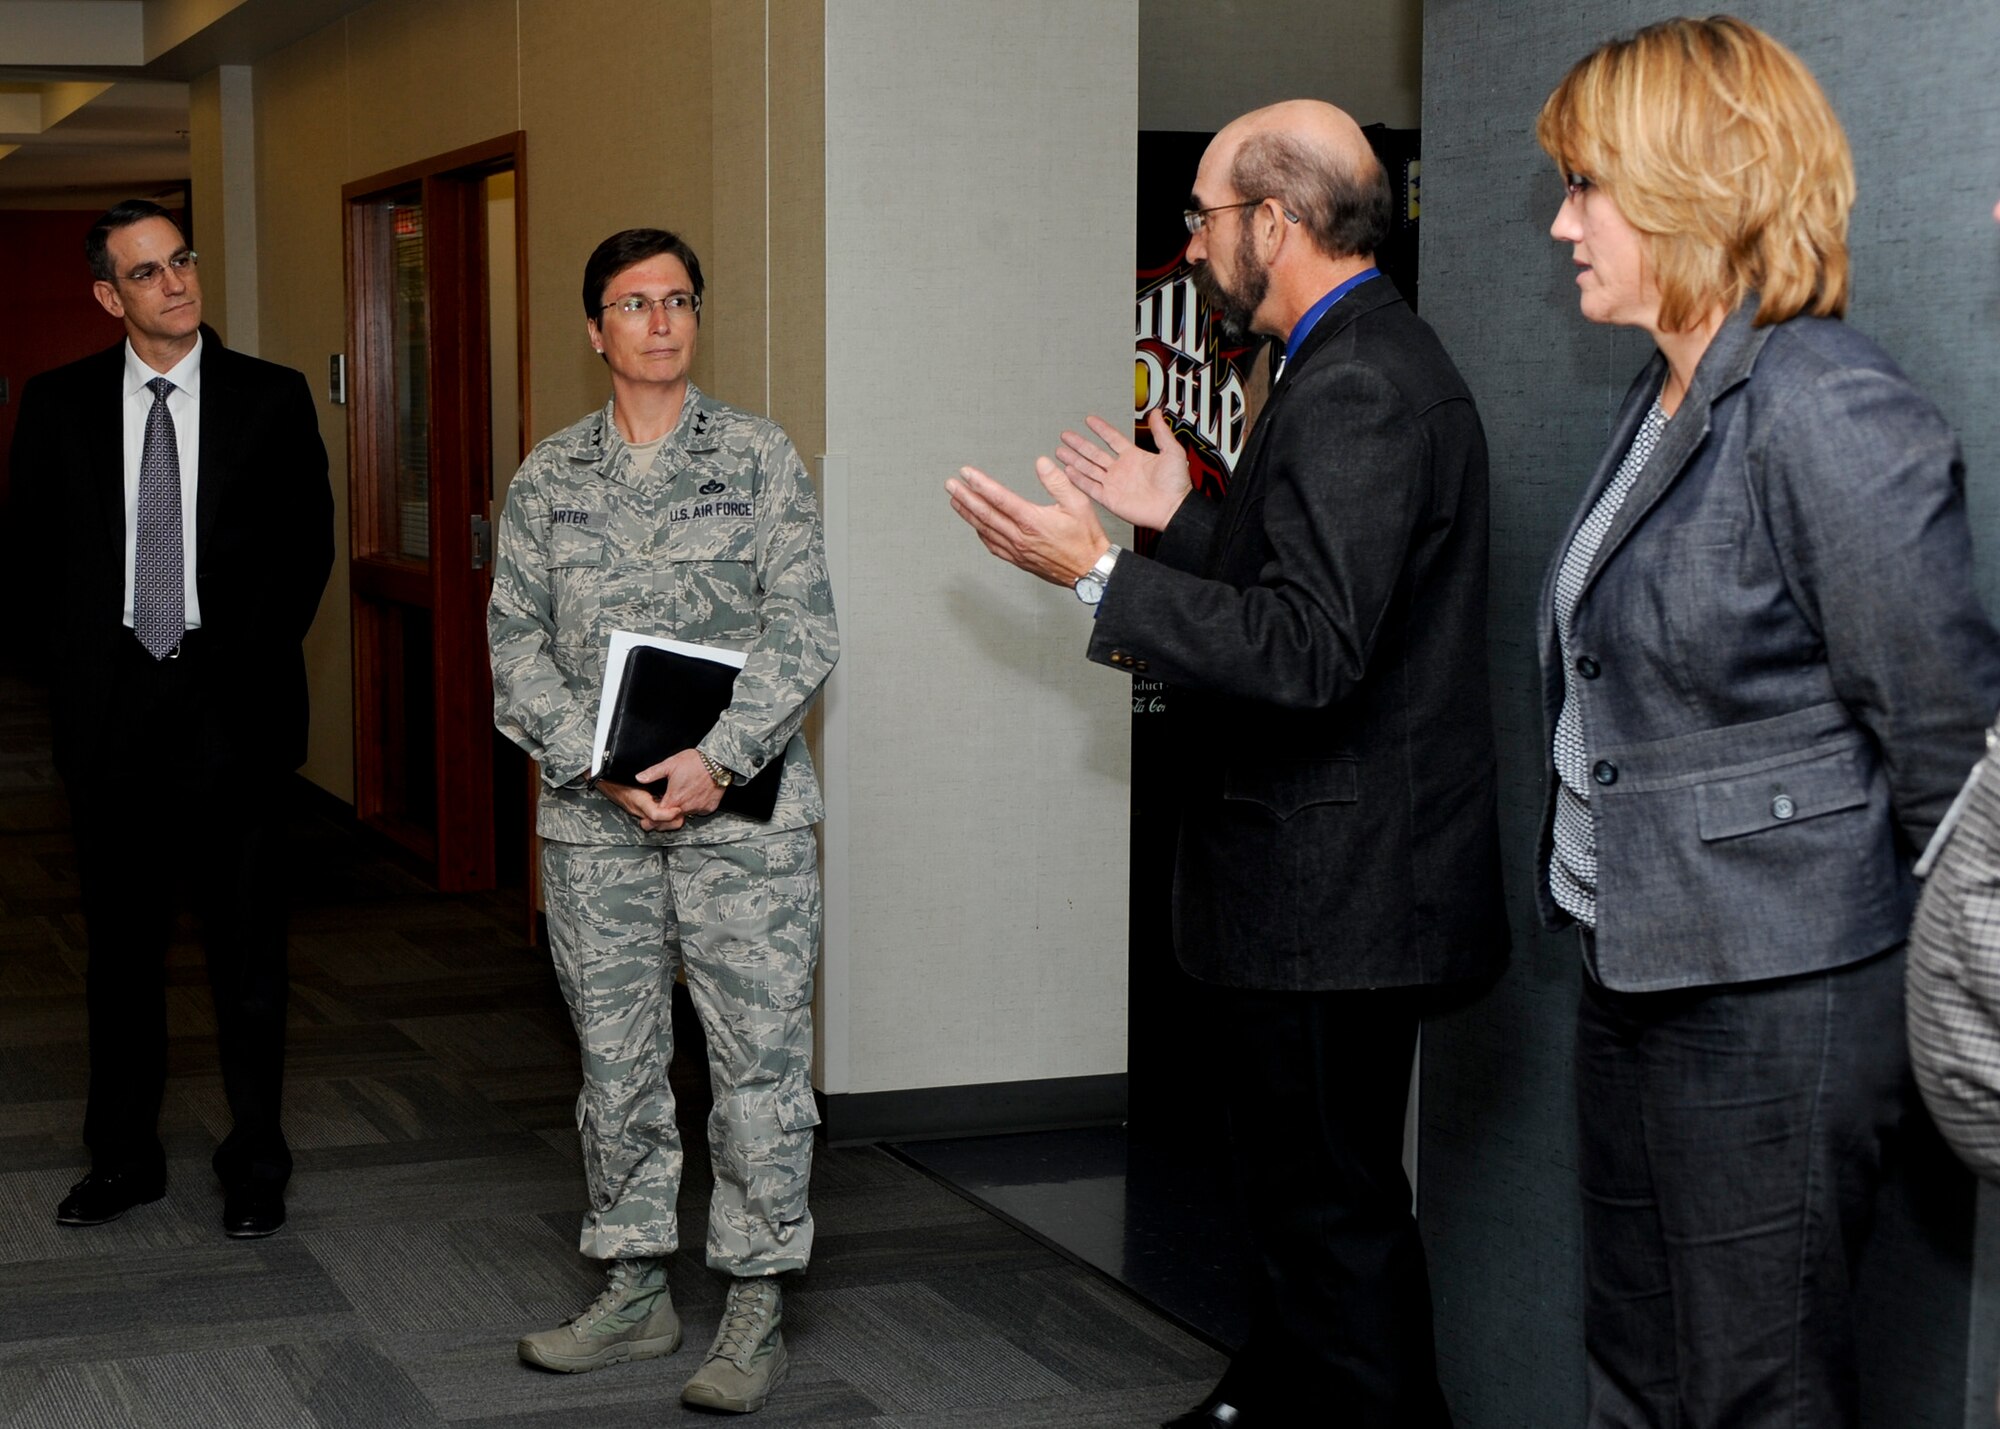 Maj. Gen. Theresa Carter, commander of the Air Force Installation and Mission Support Center (Provisional), visits with Air Force Financial Services Center Director Gary Gualano (left), Relocation Division chief Jeff Svoboda, and Audit Section chief Karen Kreutzer at Ellsworth Air Force Base, S.D., Oct 3. In addition to touring the AFFSC facility, Carter was provided information on the unit’s mission as well as a demonstration on how the unit processes vouchers and conducts its operations. (U.S. Air Force photo/Senior Airman Anania Tekurio)